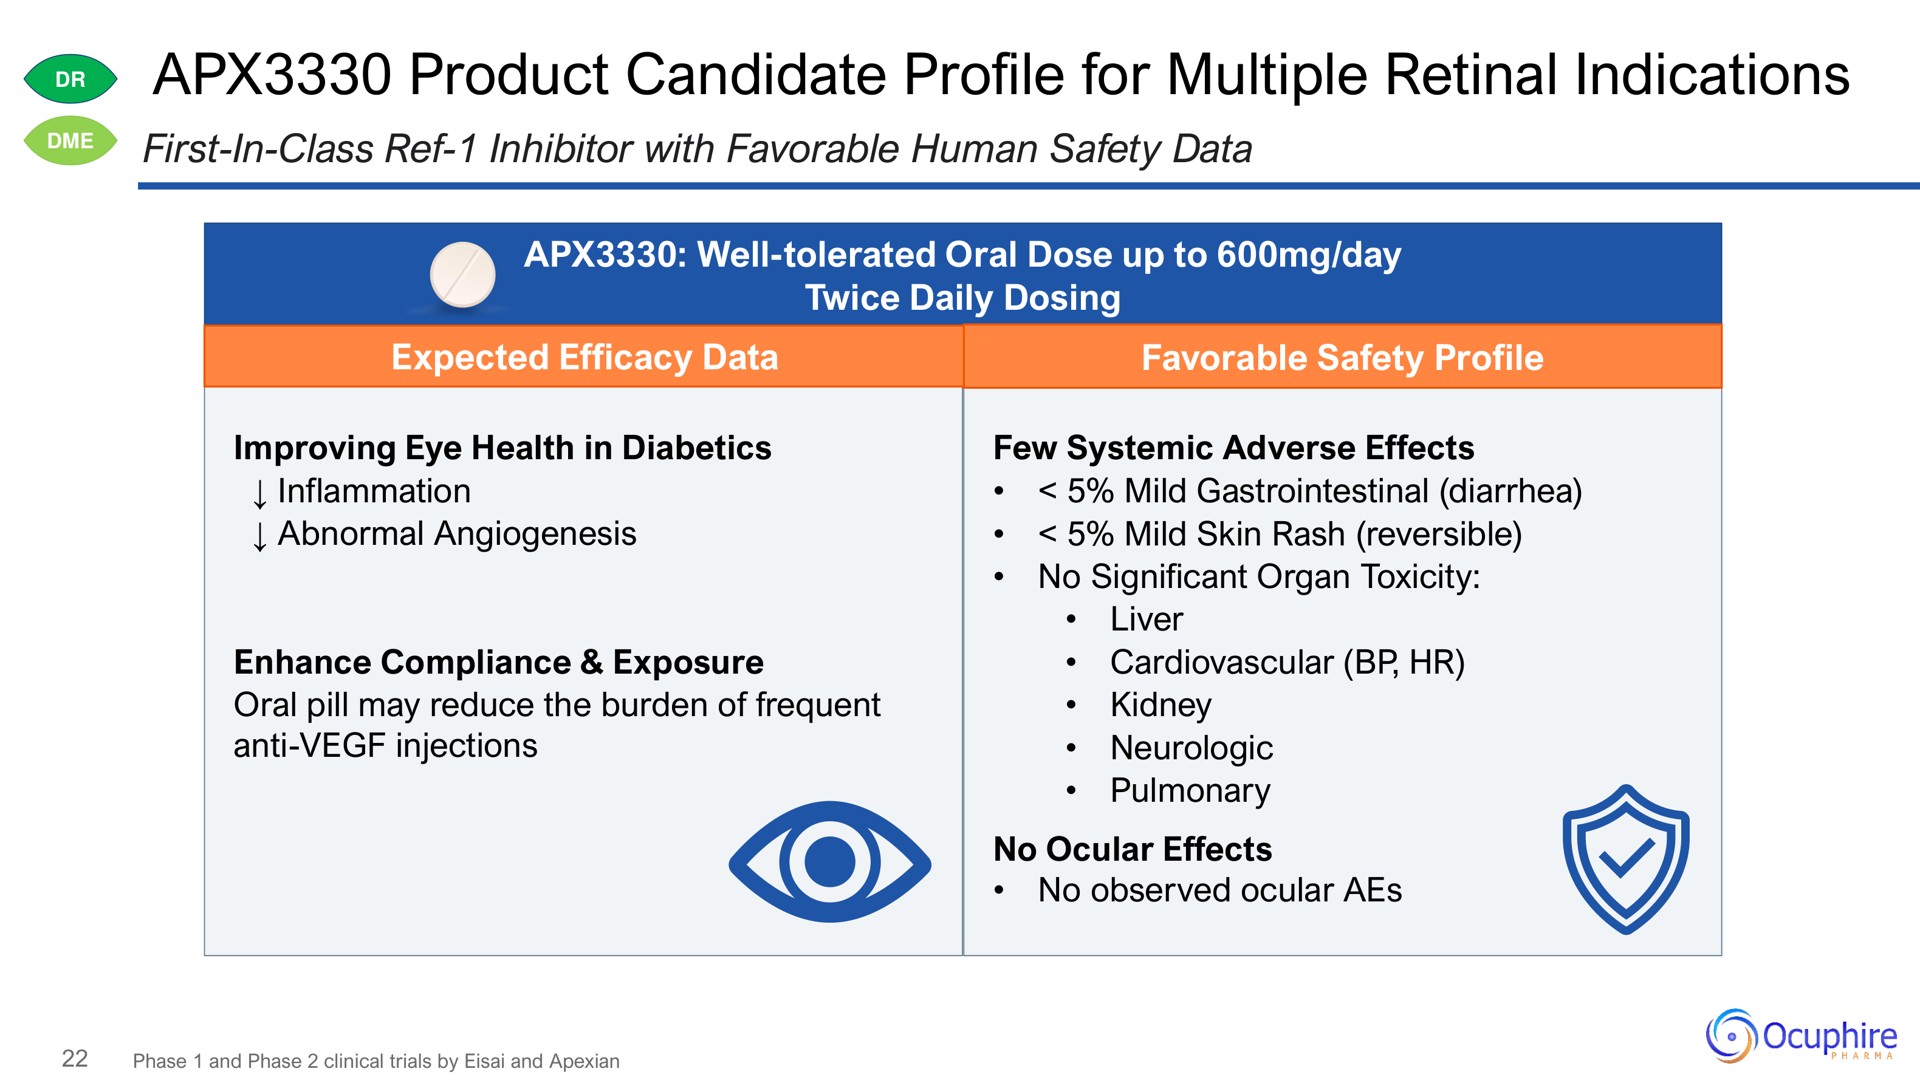 product candidate profile for multiple retinal indications | Ocuphire Pharma